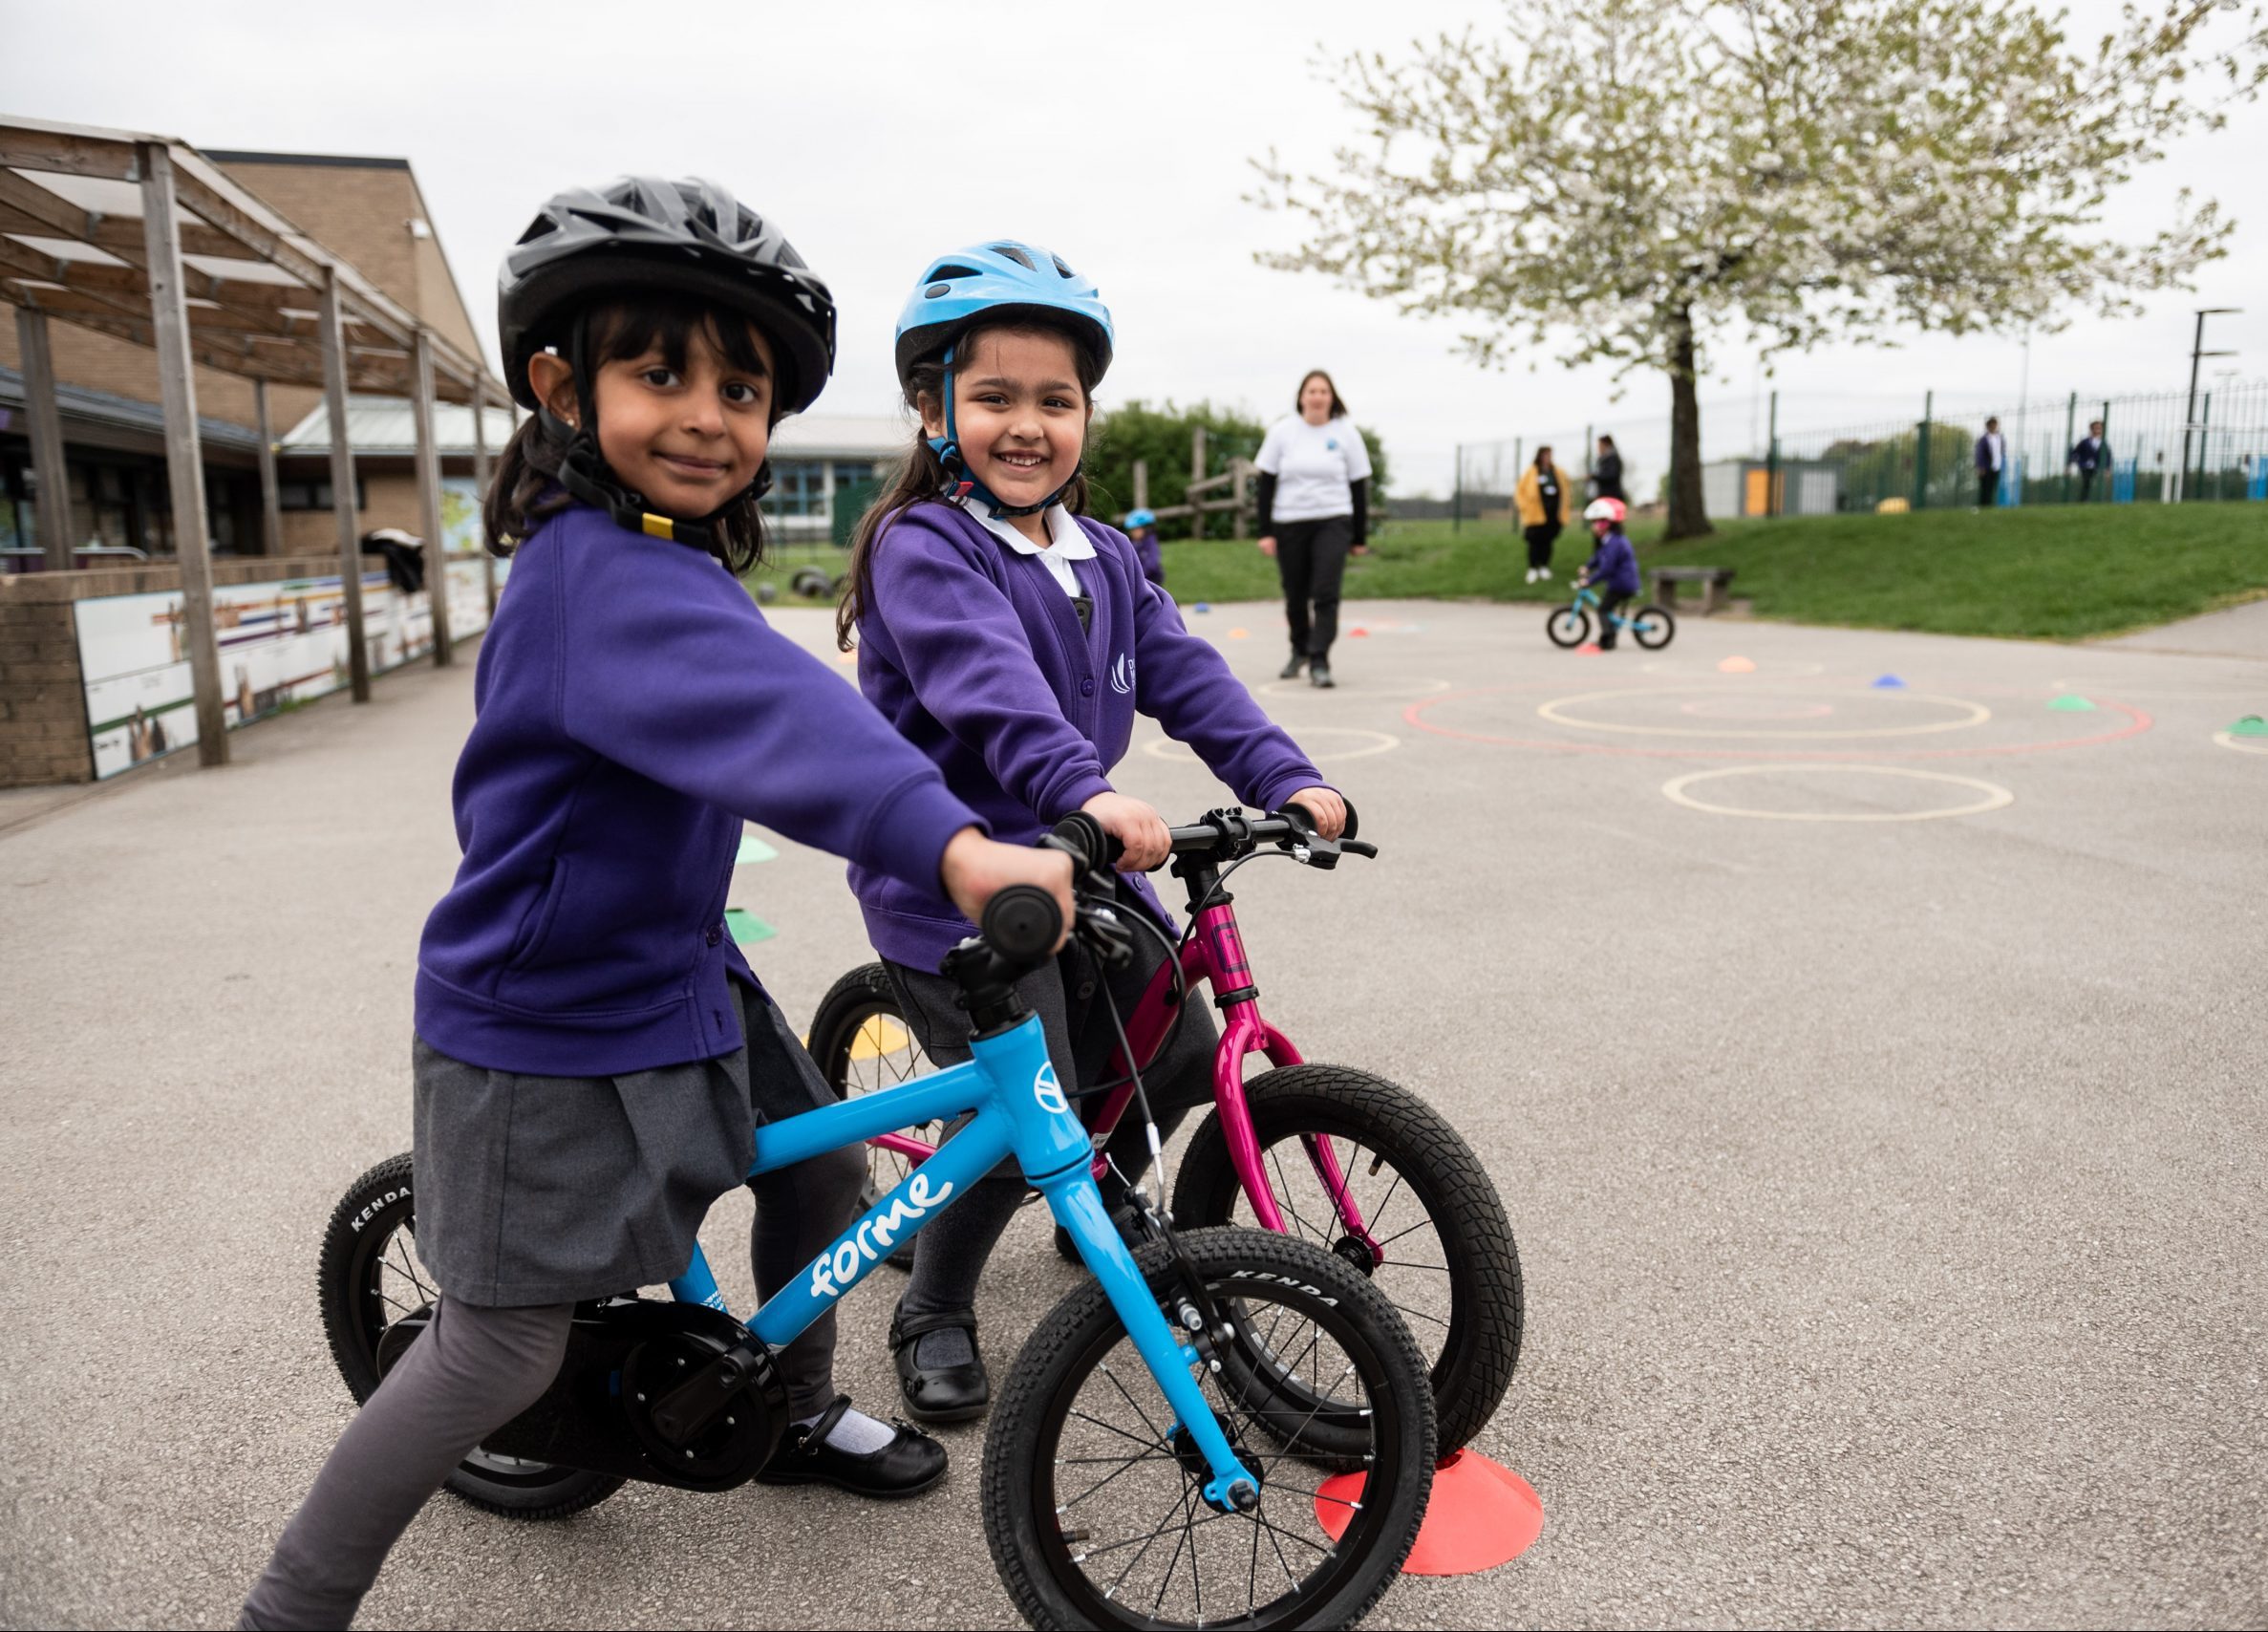 Two young girls wearing purple school cardigans and helmets smile at the camera as they straddle balance bikes.